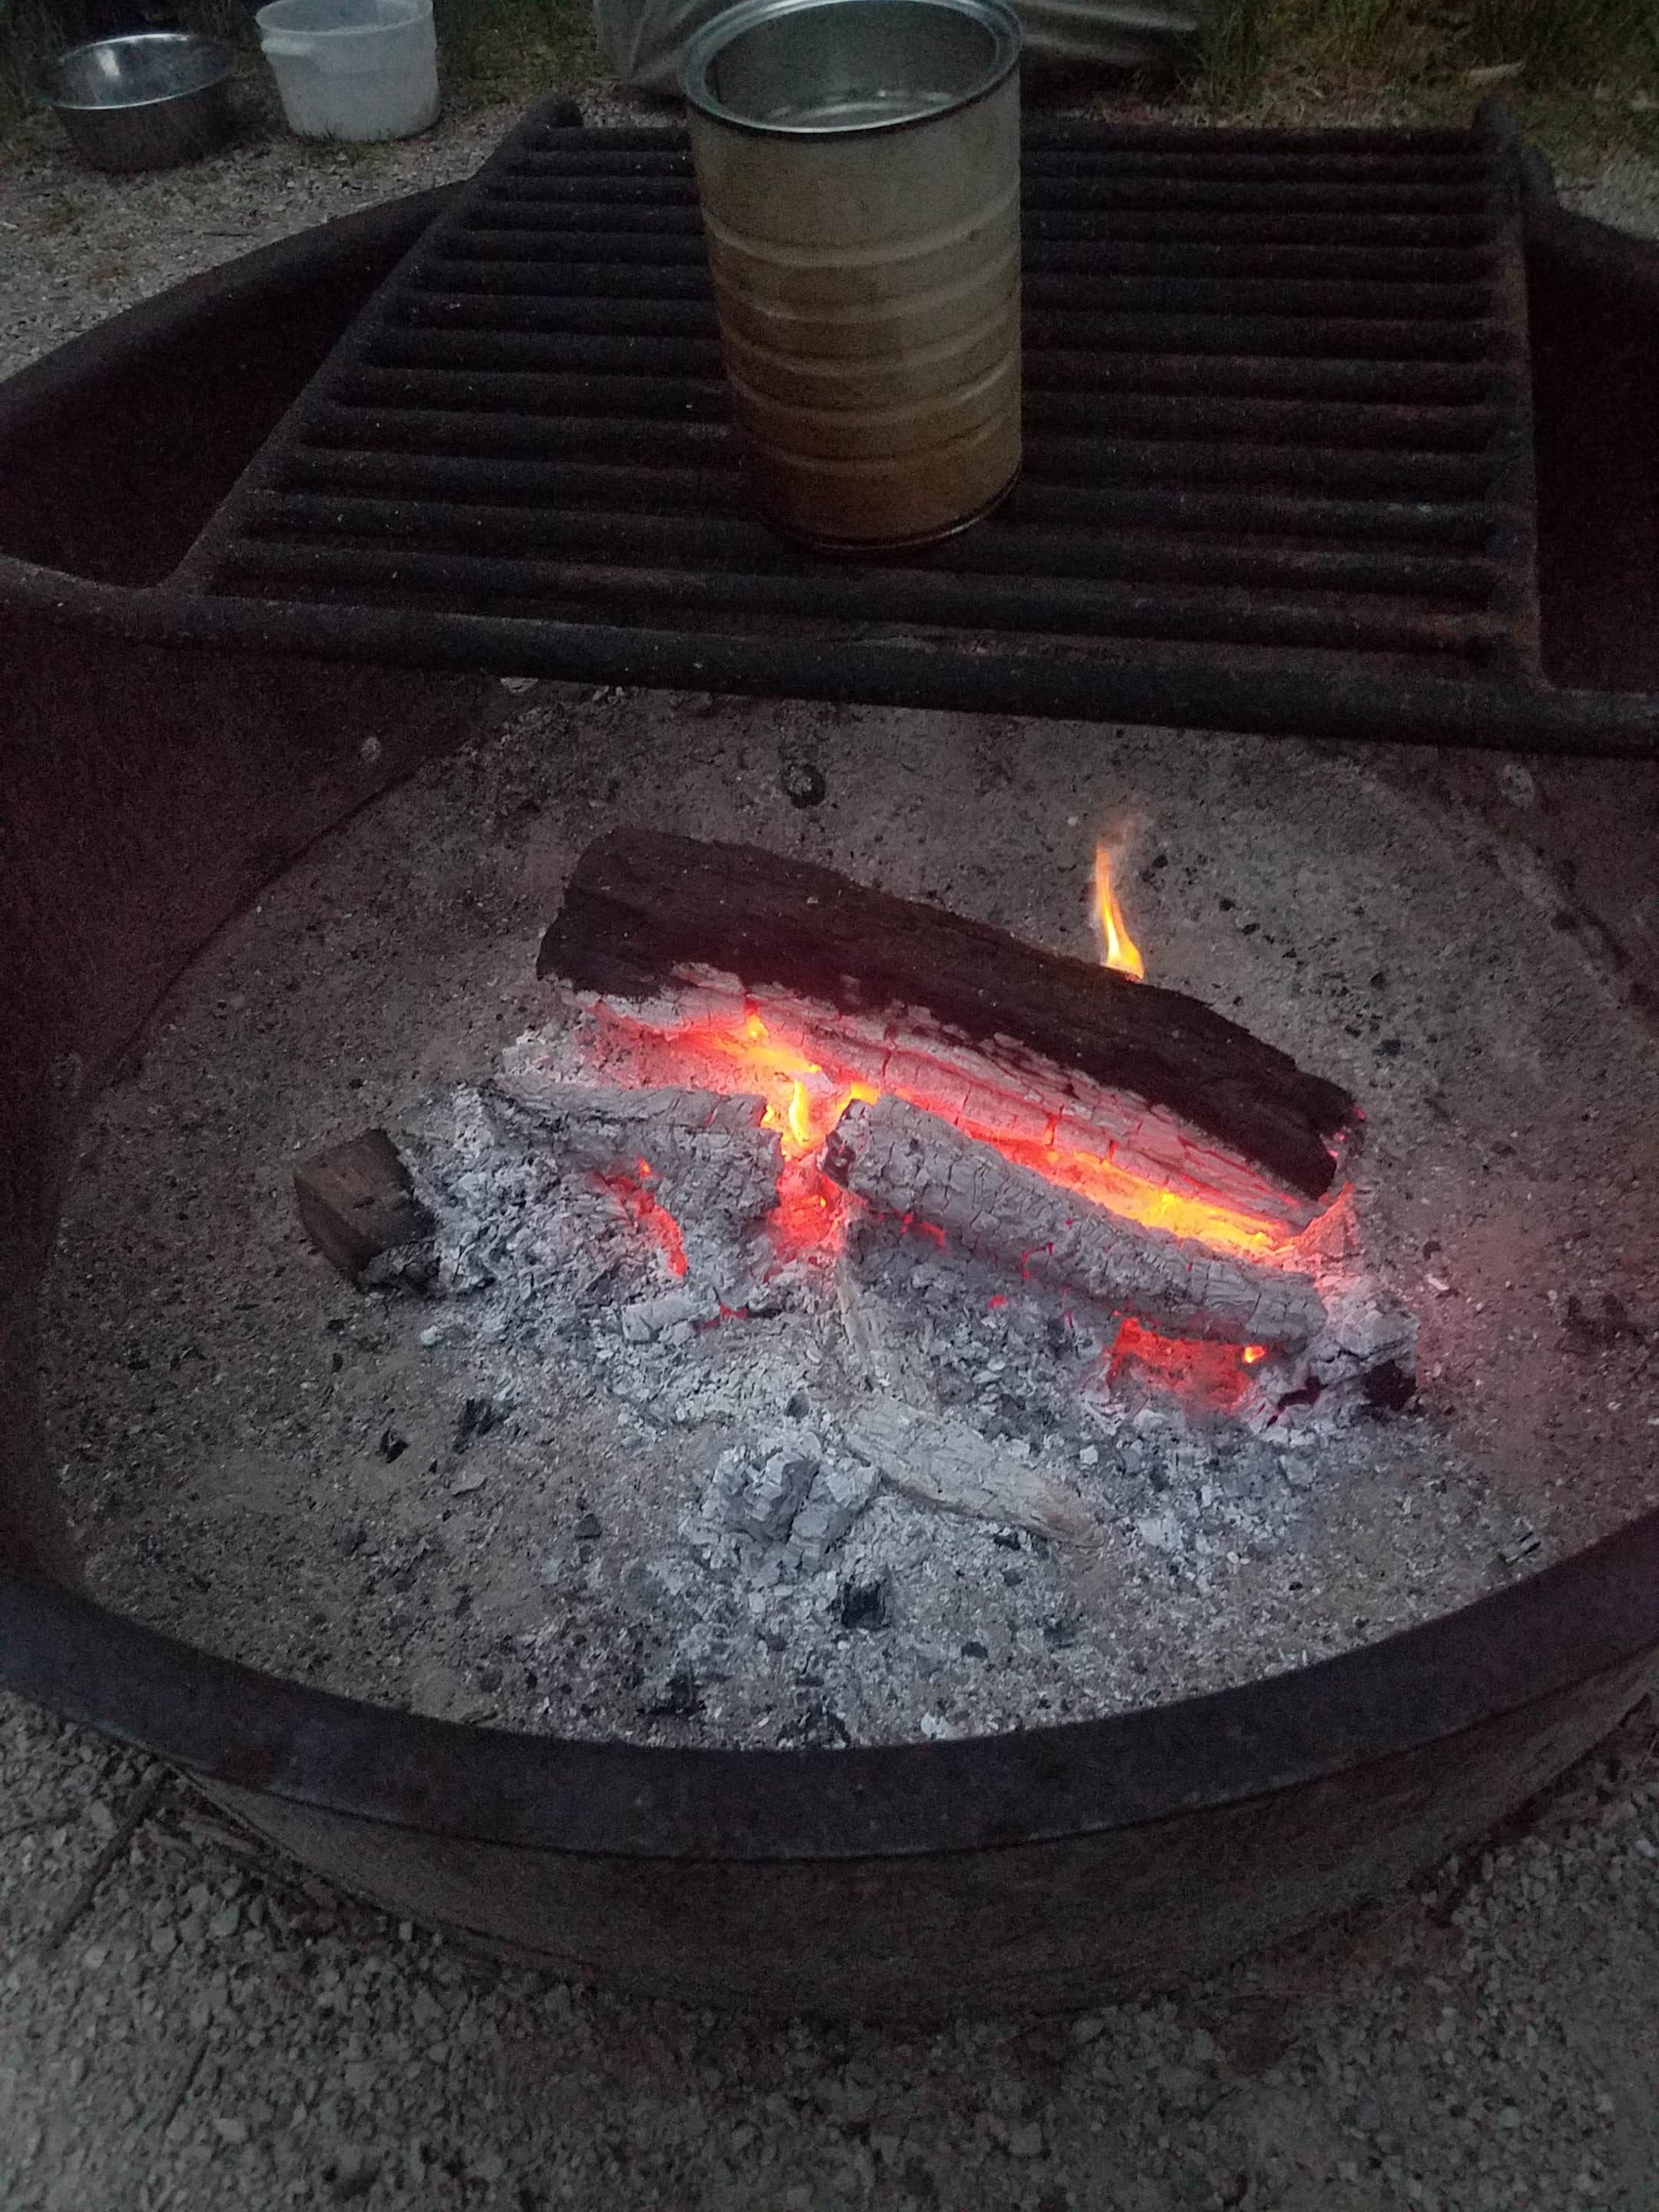 Fire pits are deep with the provided grates. I bring another grate for smaller (lower) fires to use with some lump charcoal for cooking.